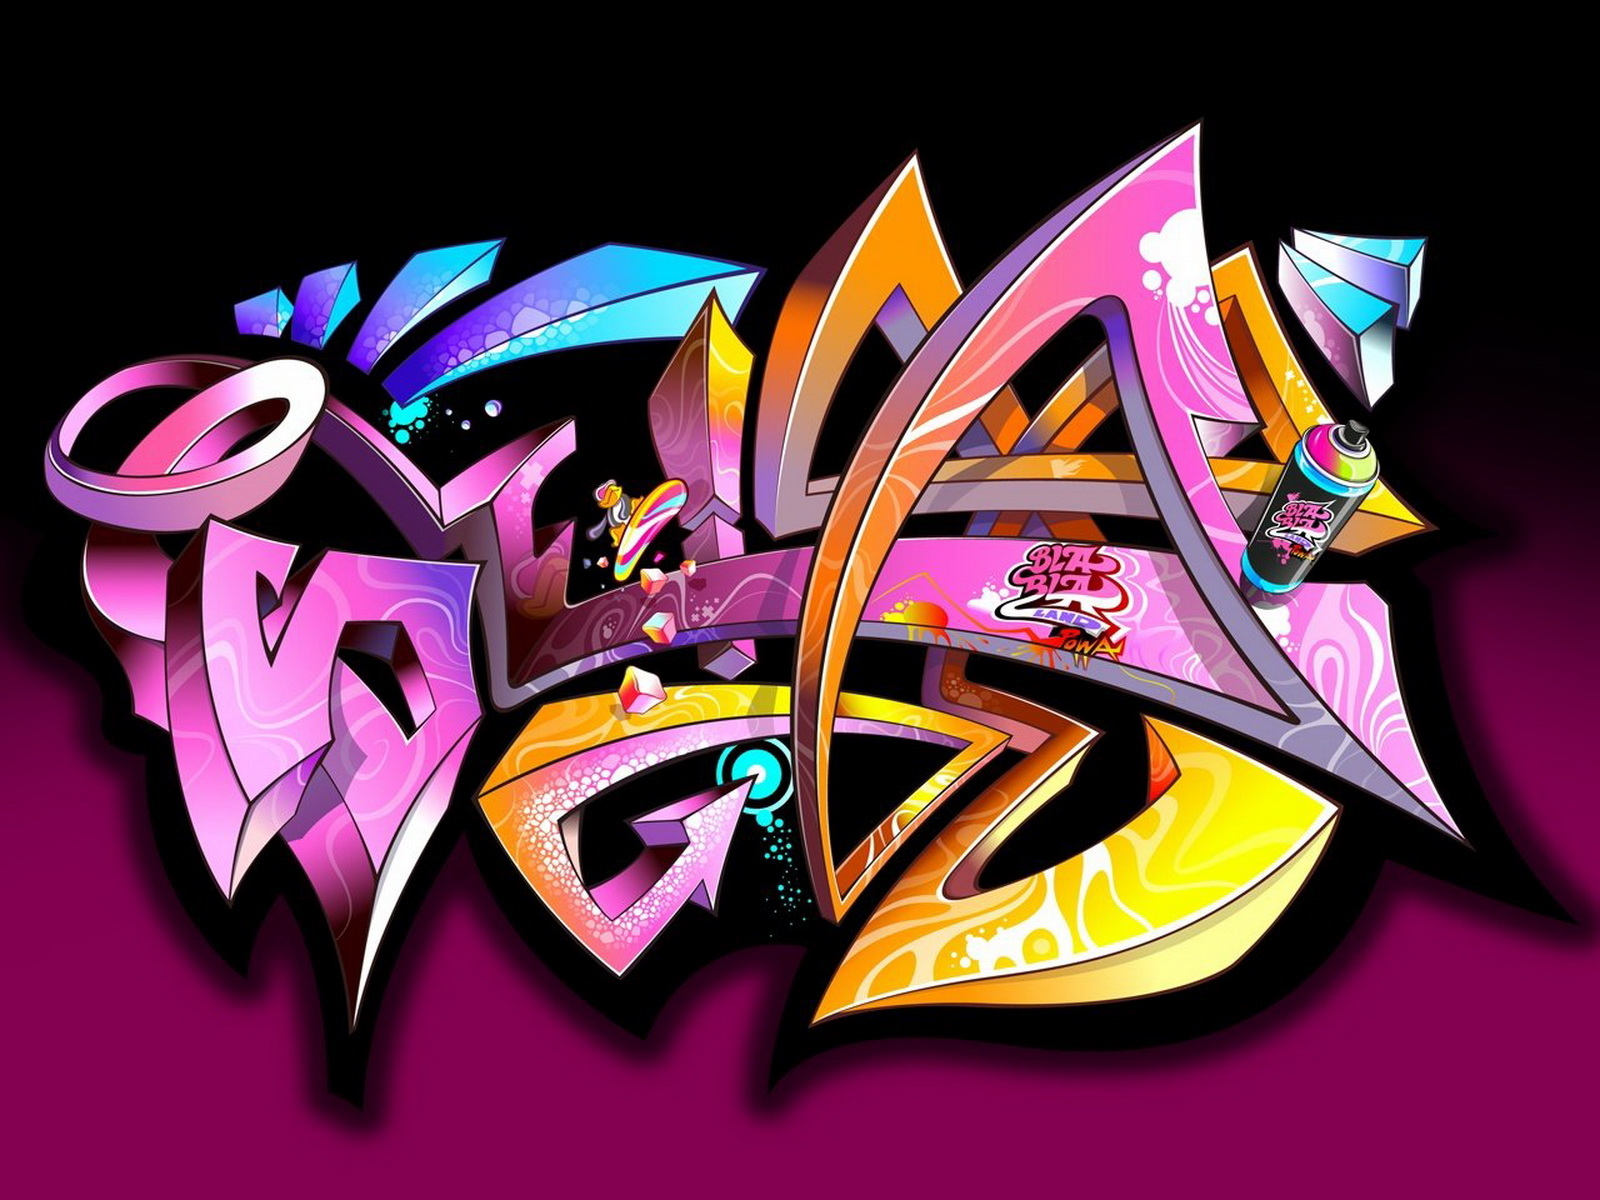 graffiti backgrounds graffiti backgrounds graffiti backgrounds 1600x1200